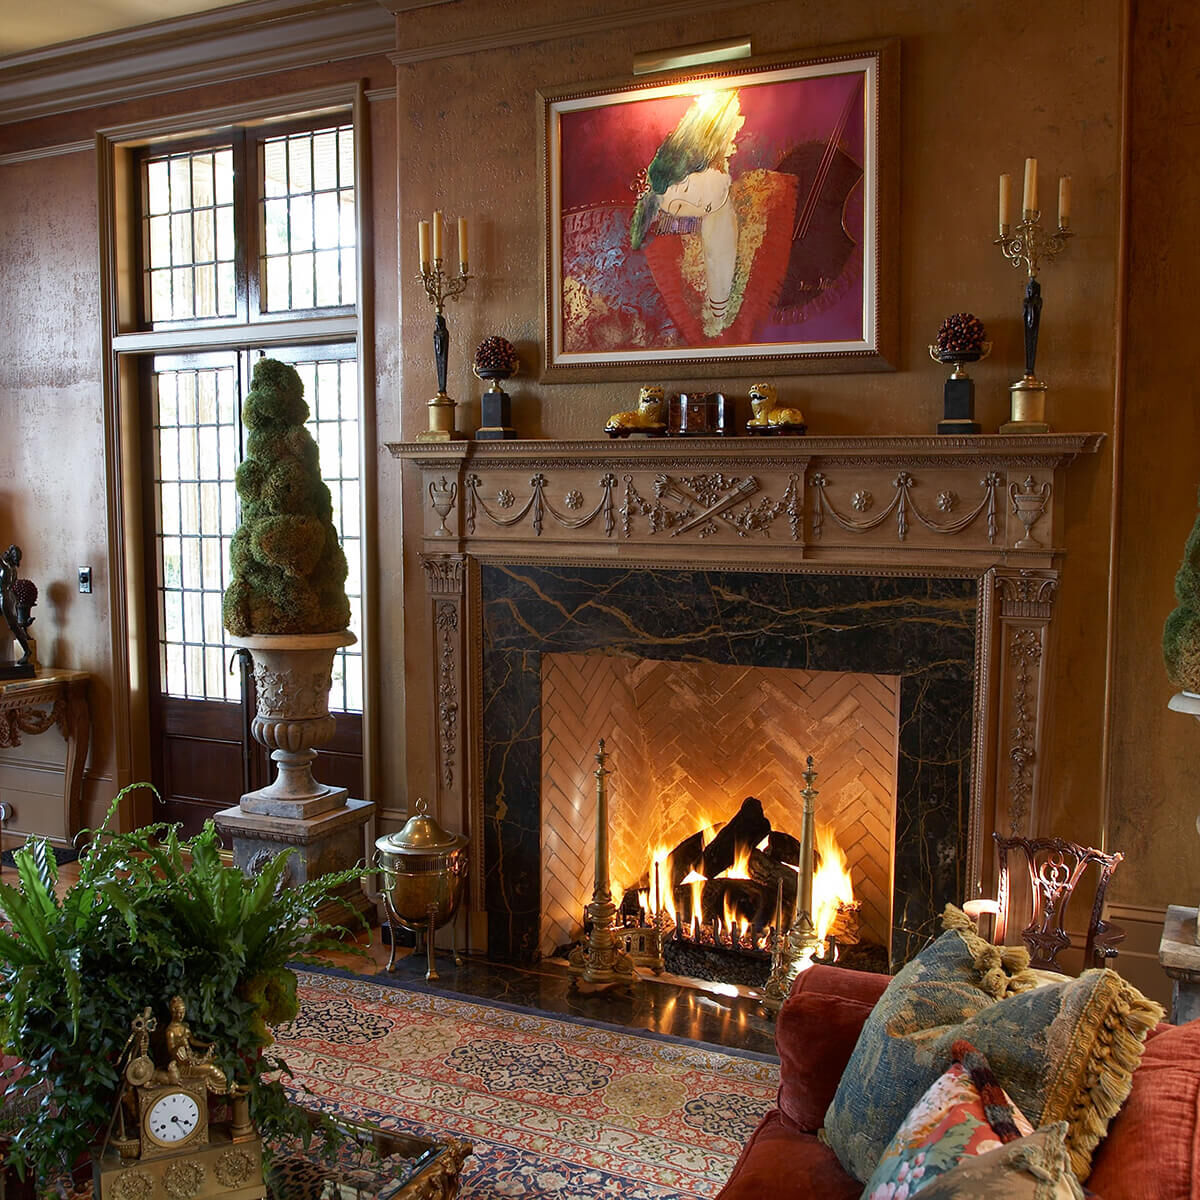 Traditional styled room with gas fire place